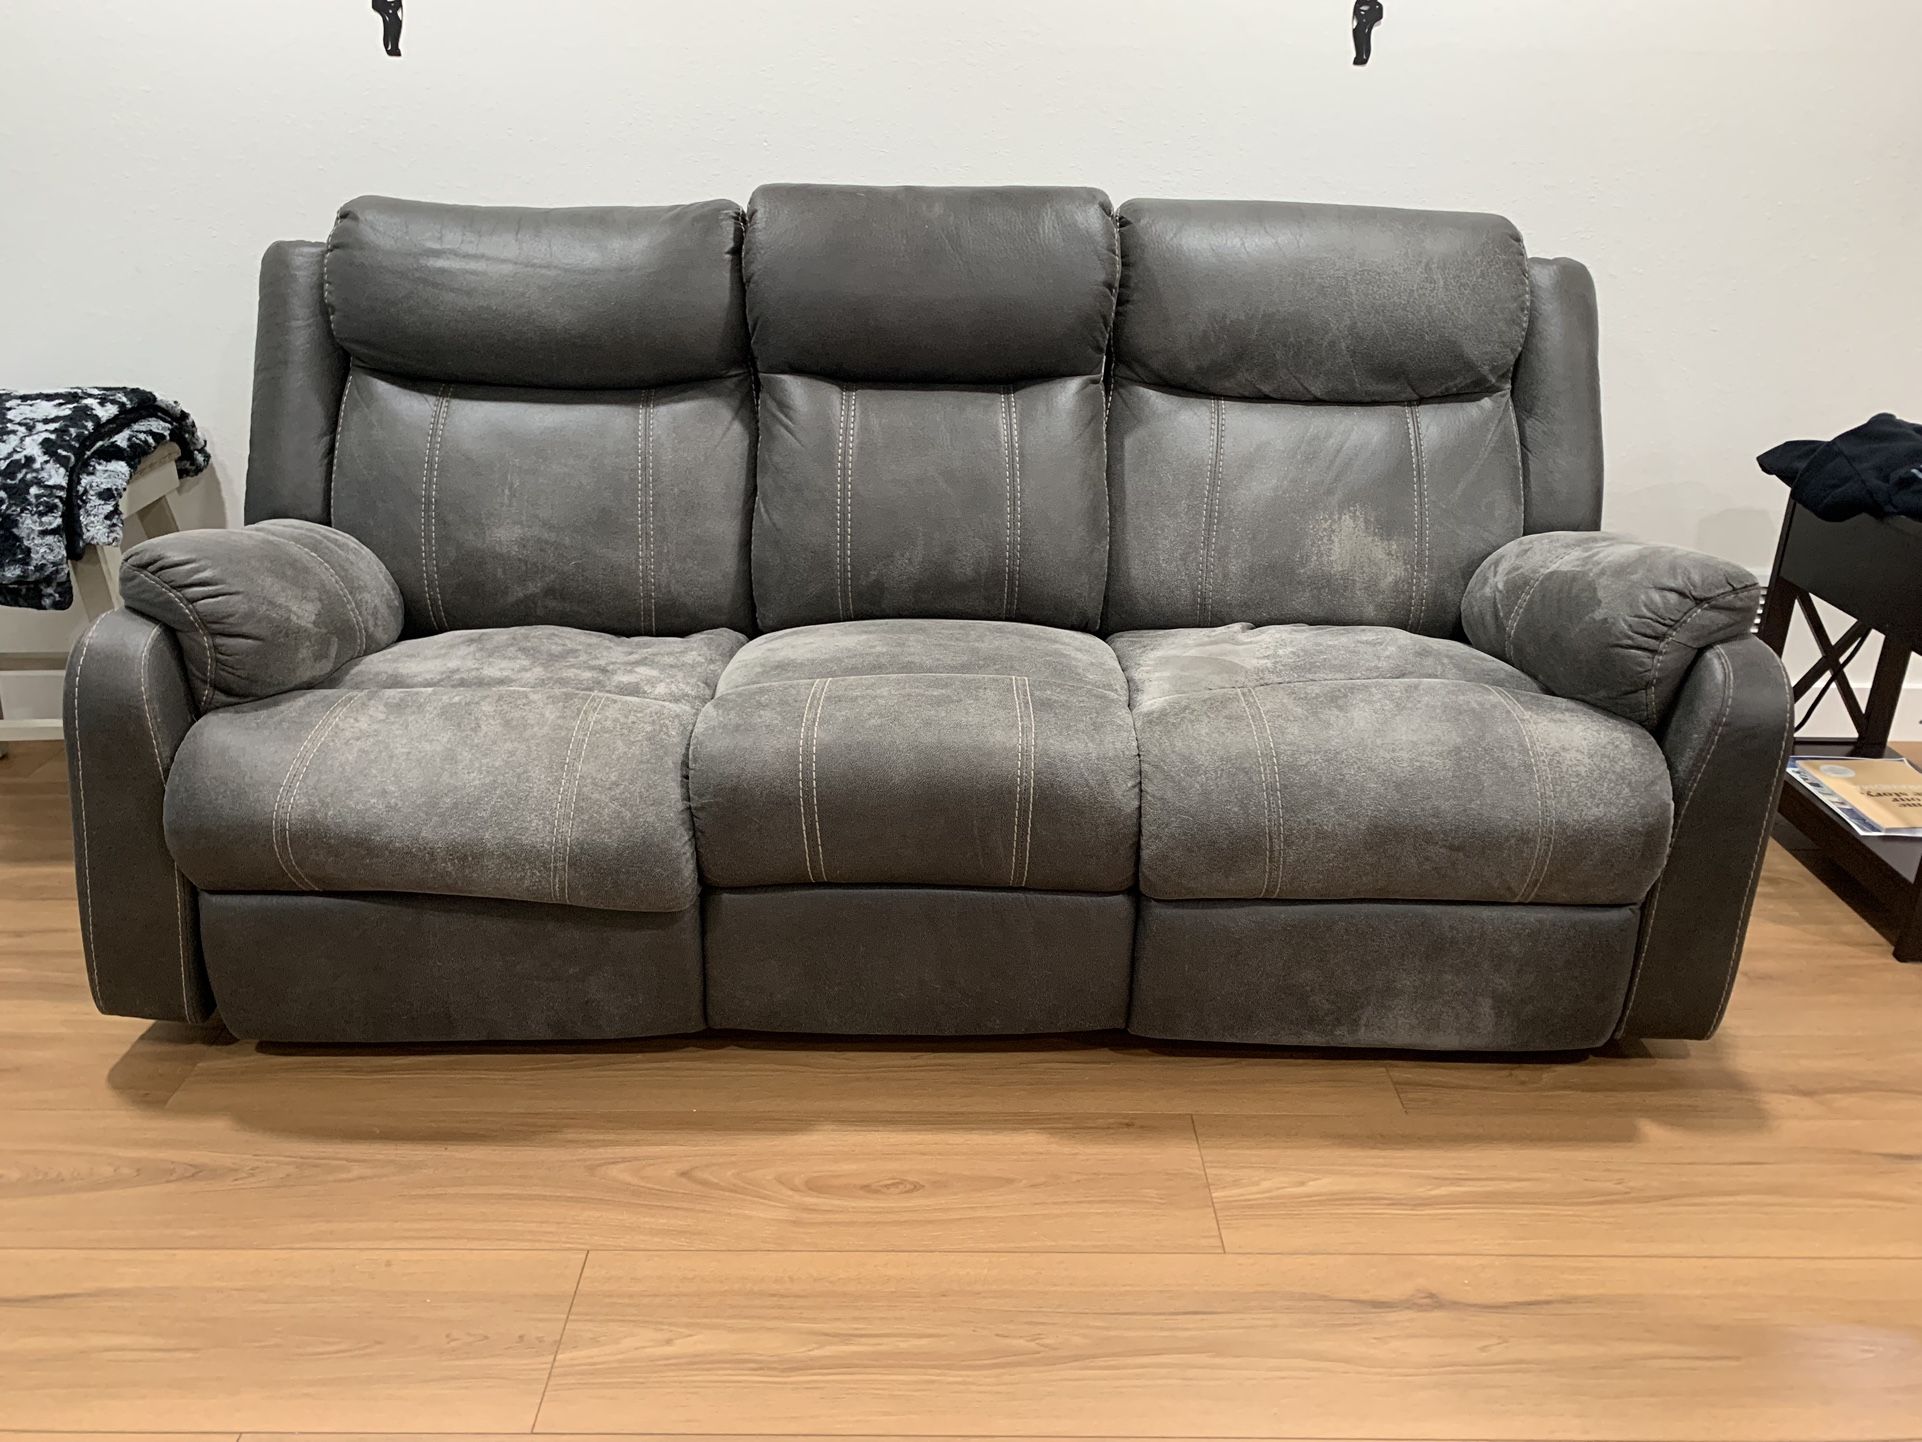 Sofa With 2recliners And Recliner Chair